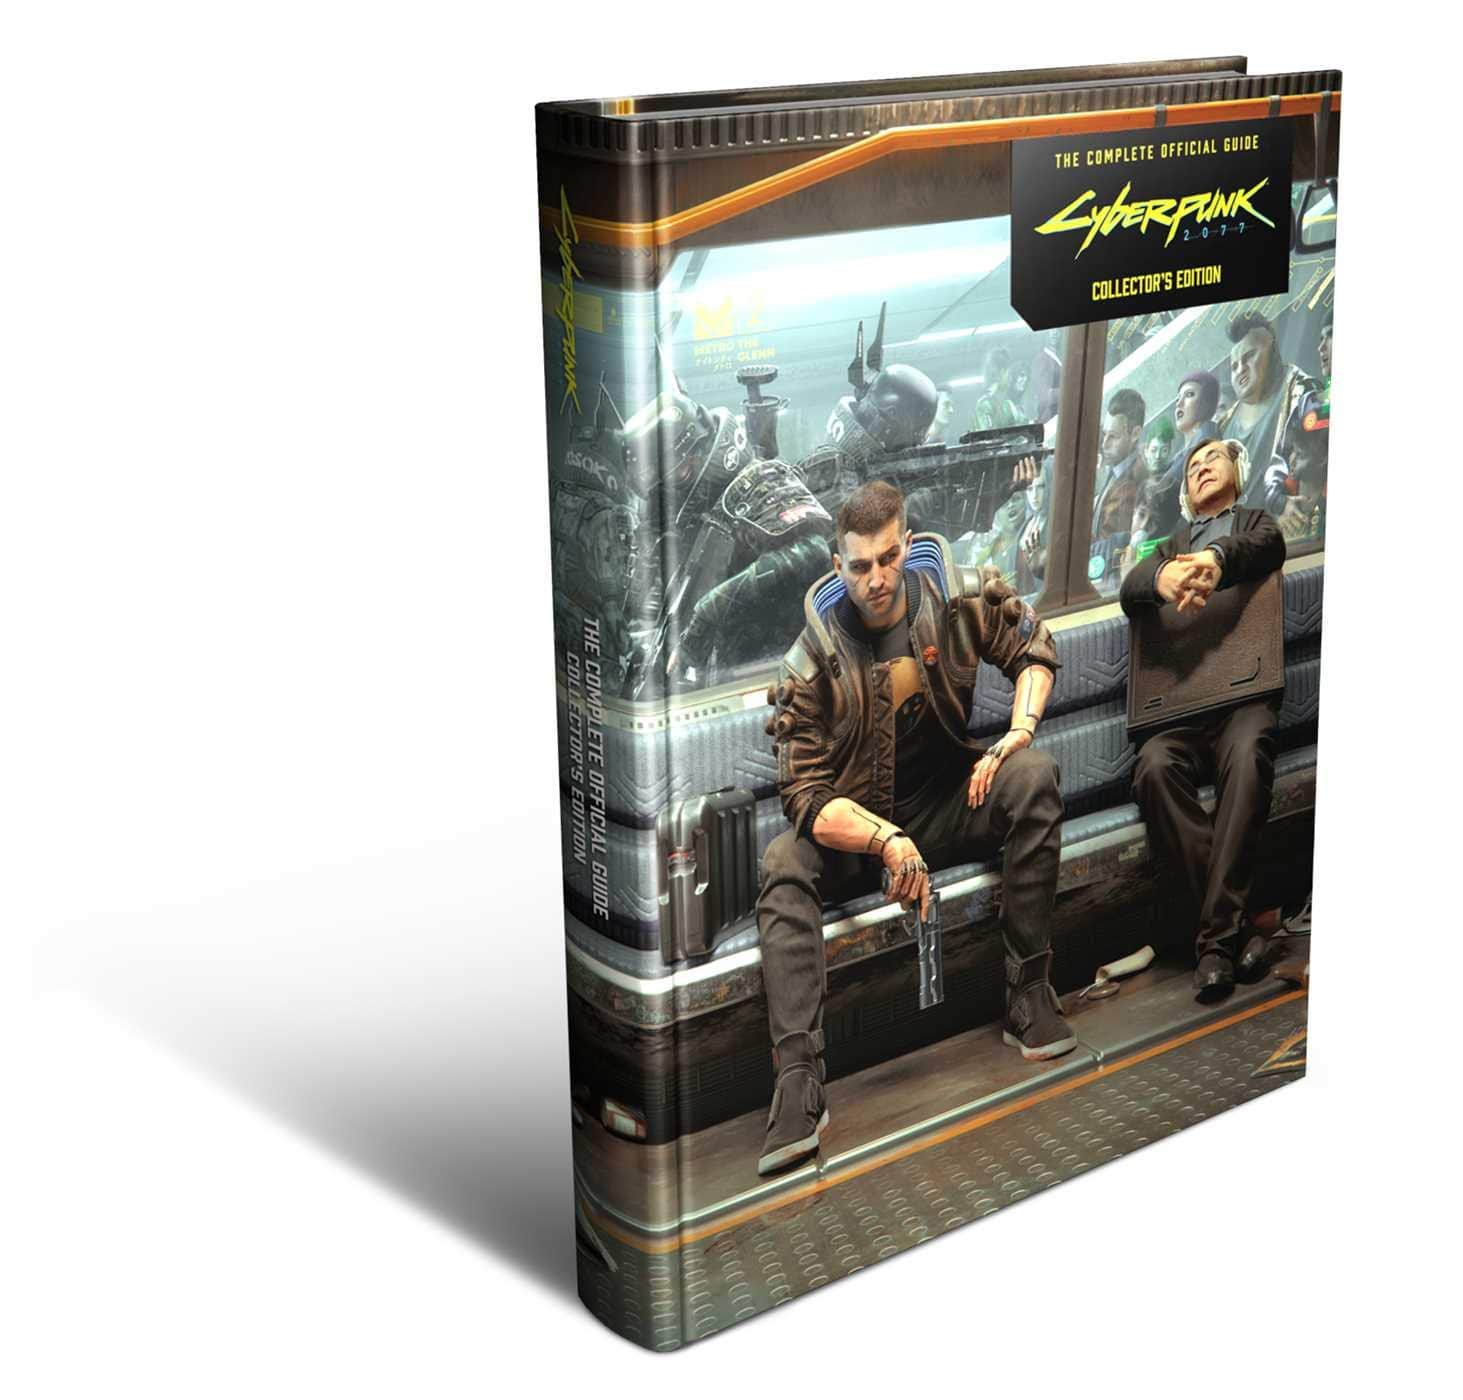 Cyberpunk 2077 | The Complete Official Guide | Collector's Edition